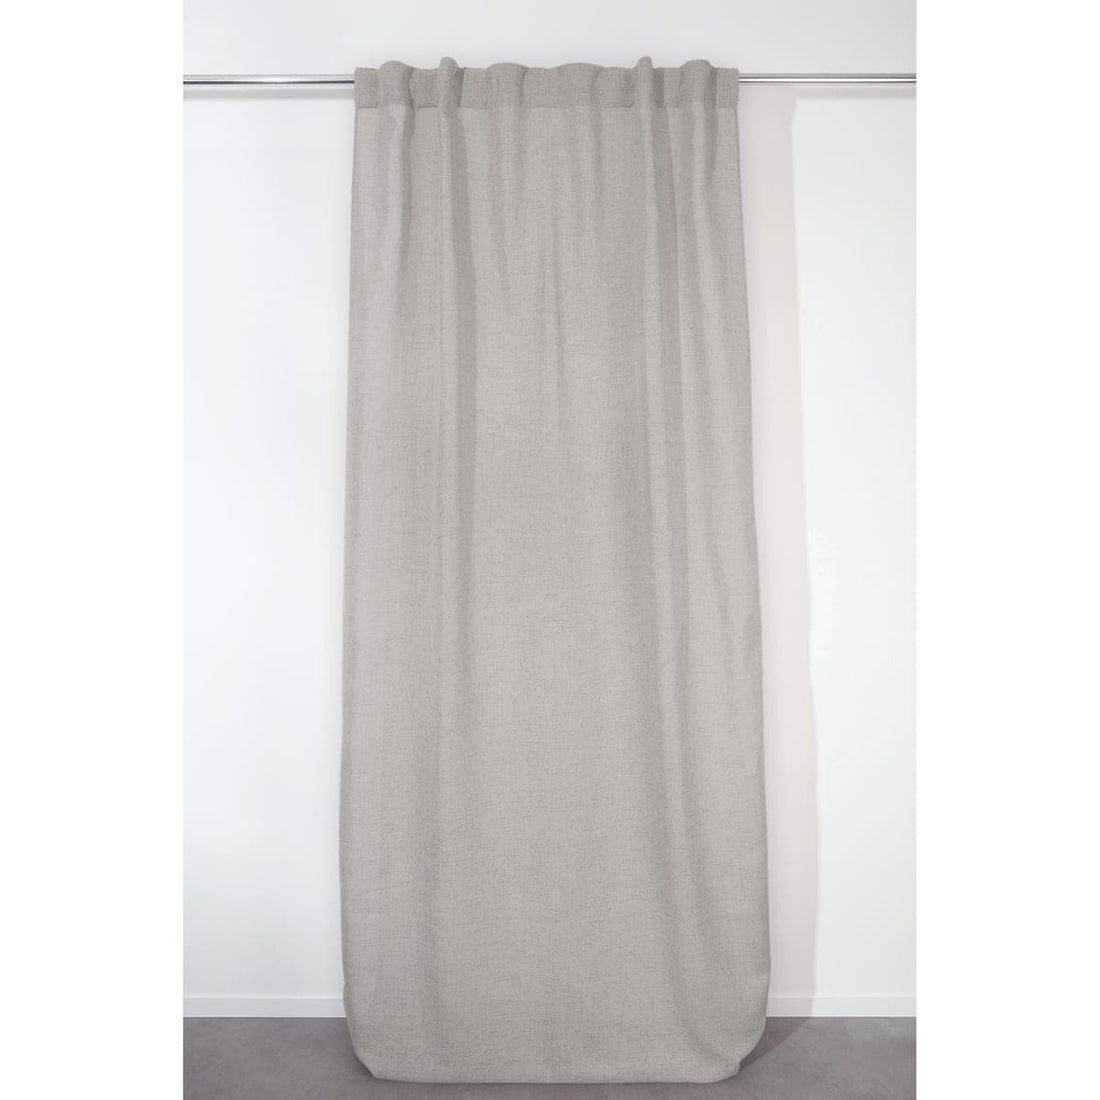 LIGHT GREY OPAQUE COLOSO CURTAIN 135X280 CM WITH LOOP AND WEBBING - best price from Maltashopper.com BR480008004